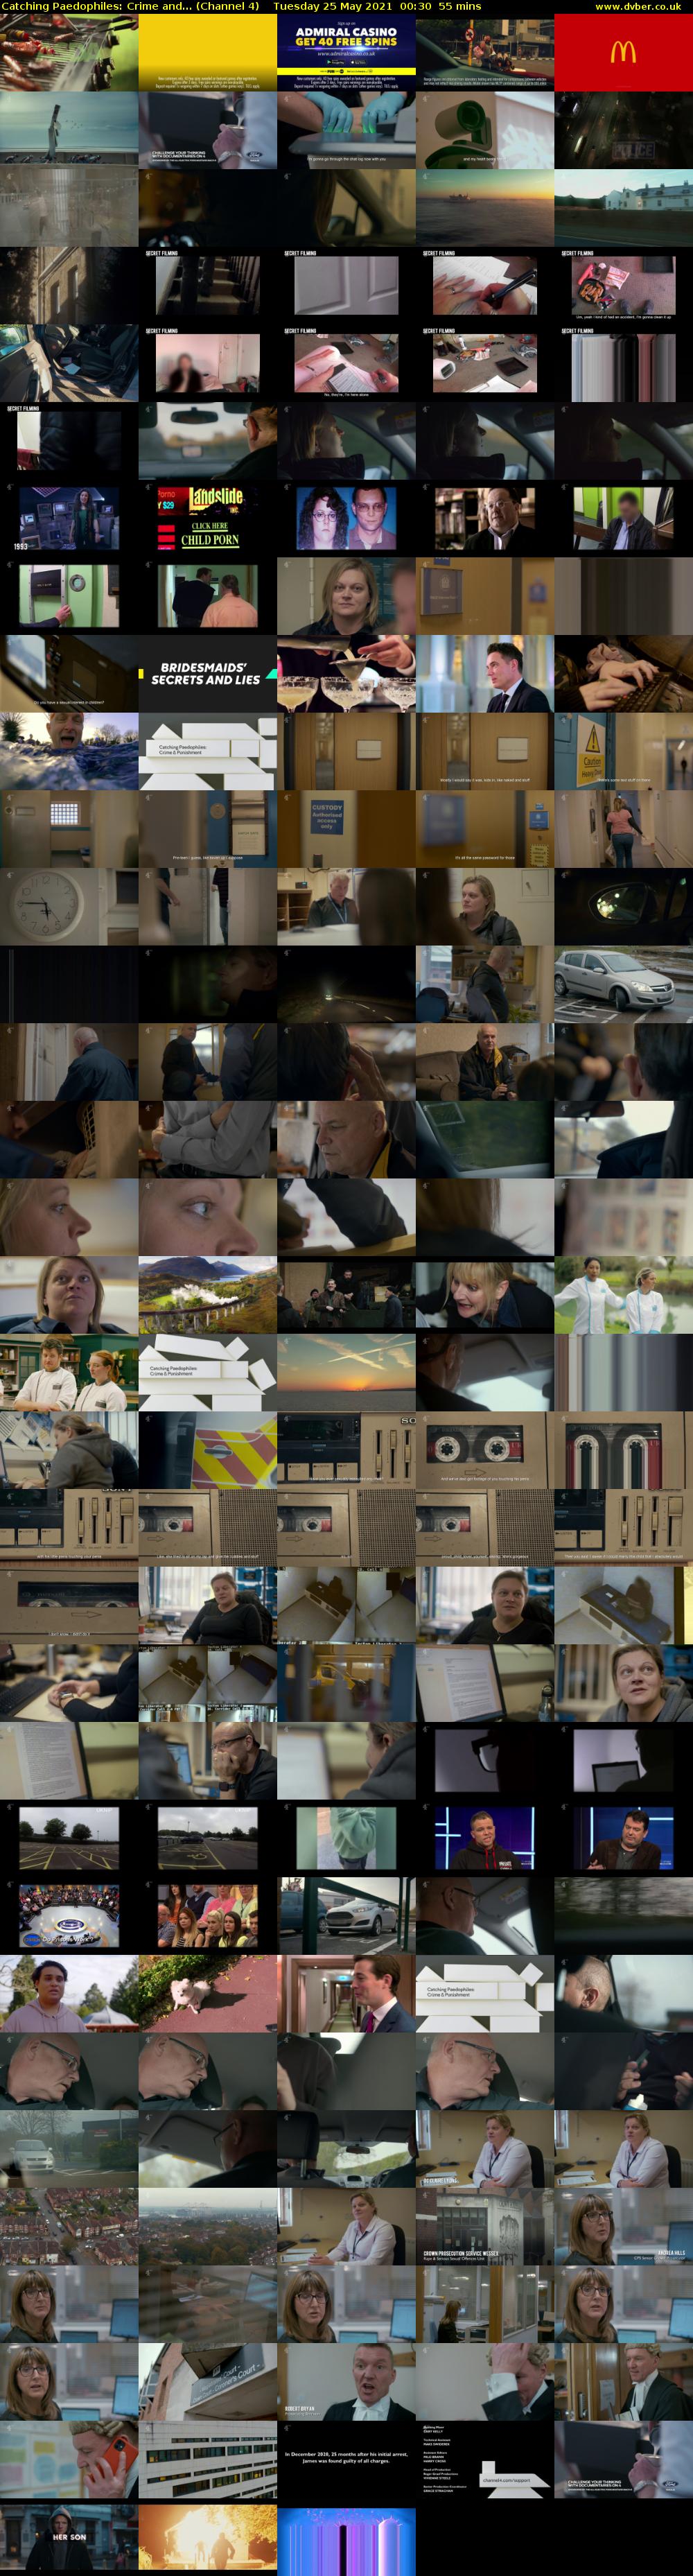 Catching Paedophiles: Crime and... (Channel 4) Tuesday 25 May 2021 00:30 - 01:25